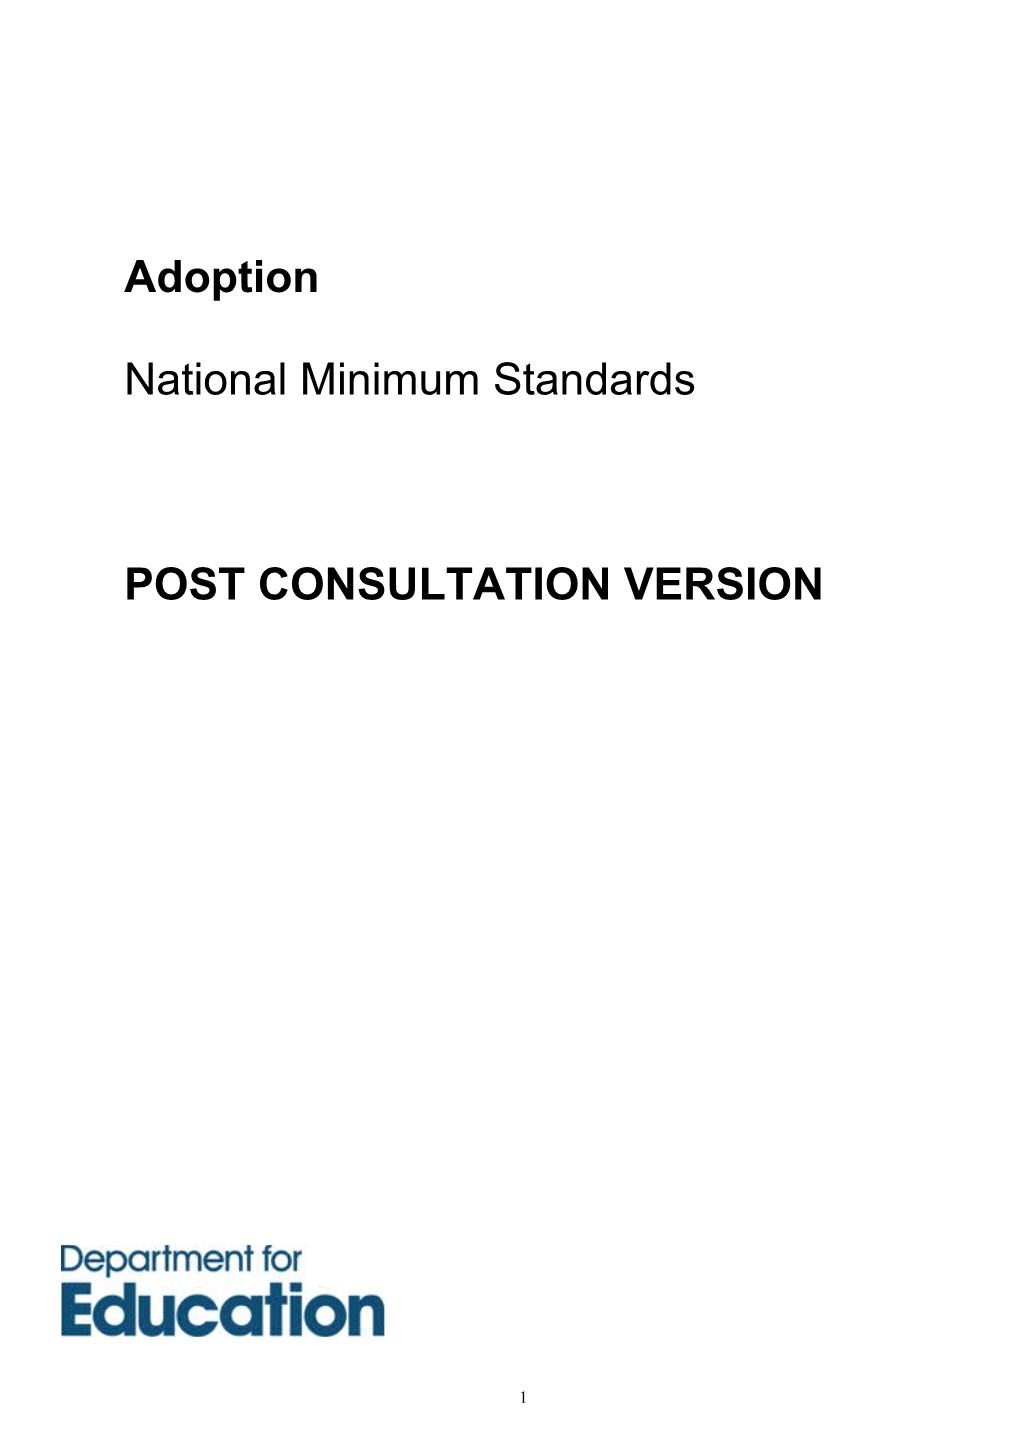 The Following Are the Revised Standards Post Consultation Draft 1